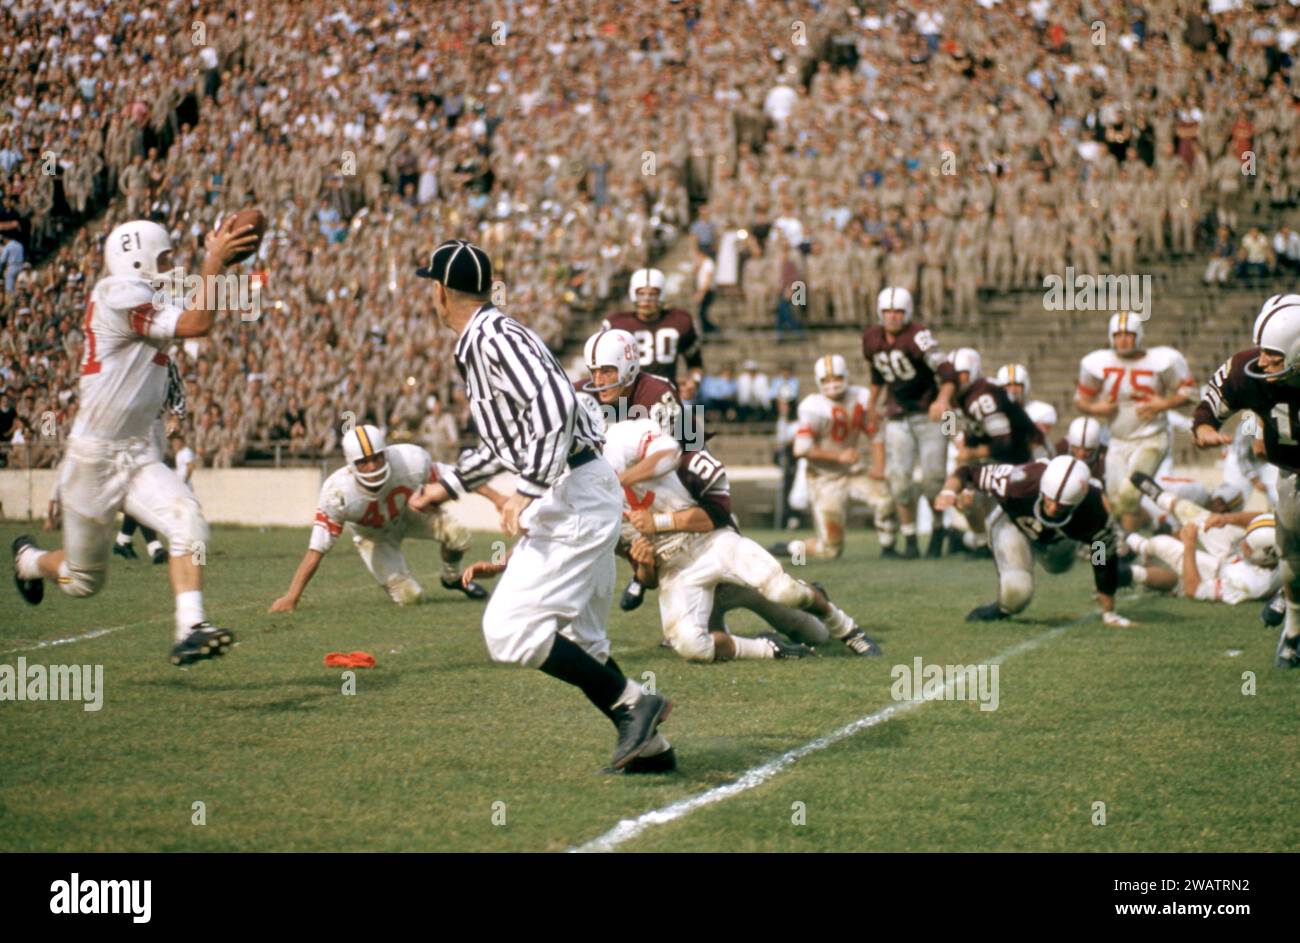 DALLAS, TX - SEPTEMBER 21:  General view of players from the #2 ranked Texas A&M Aggies playing against the Maryland Terrapins on September 21, 1957 at the Cotton Bowl in Dallas, Texas.  The Aggies defetead the Terrapins 21-13.  (Photo by Hy Peskin) Stock Photo